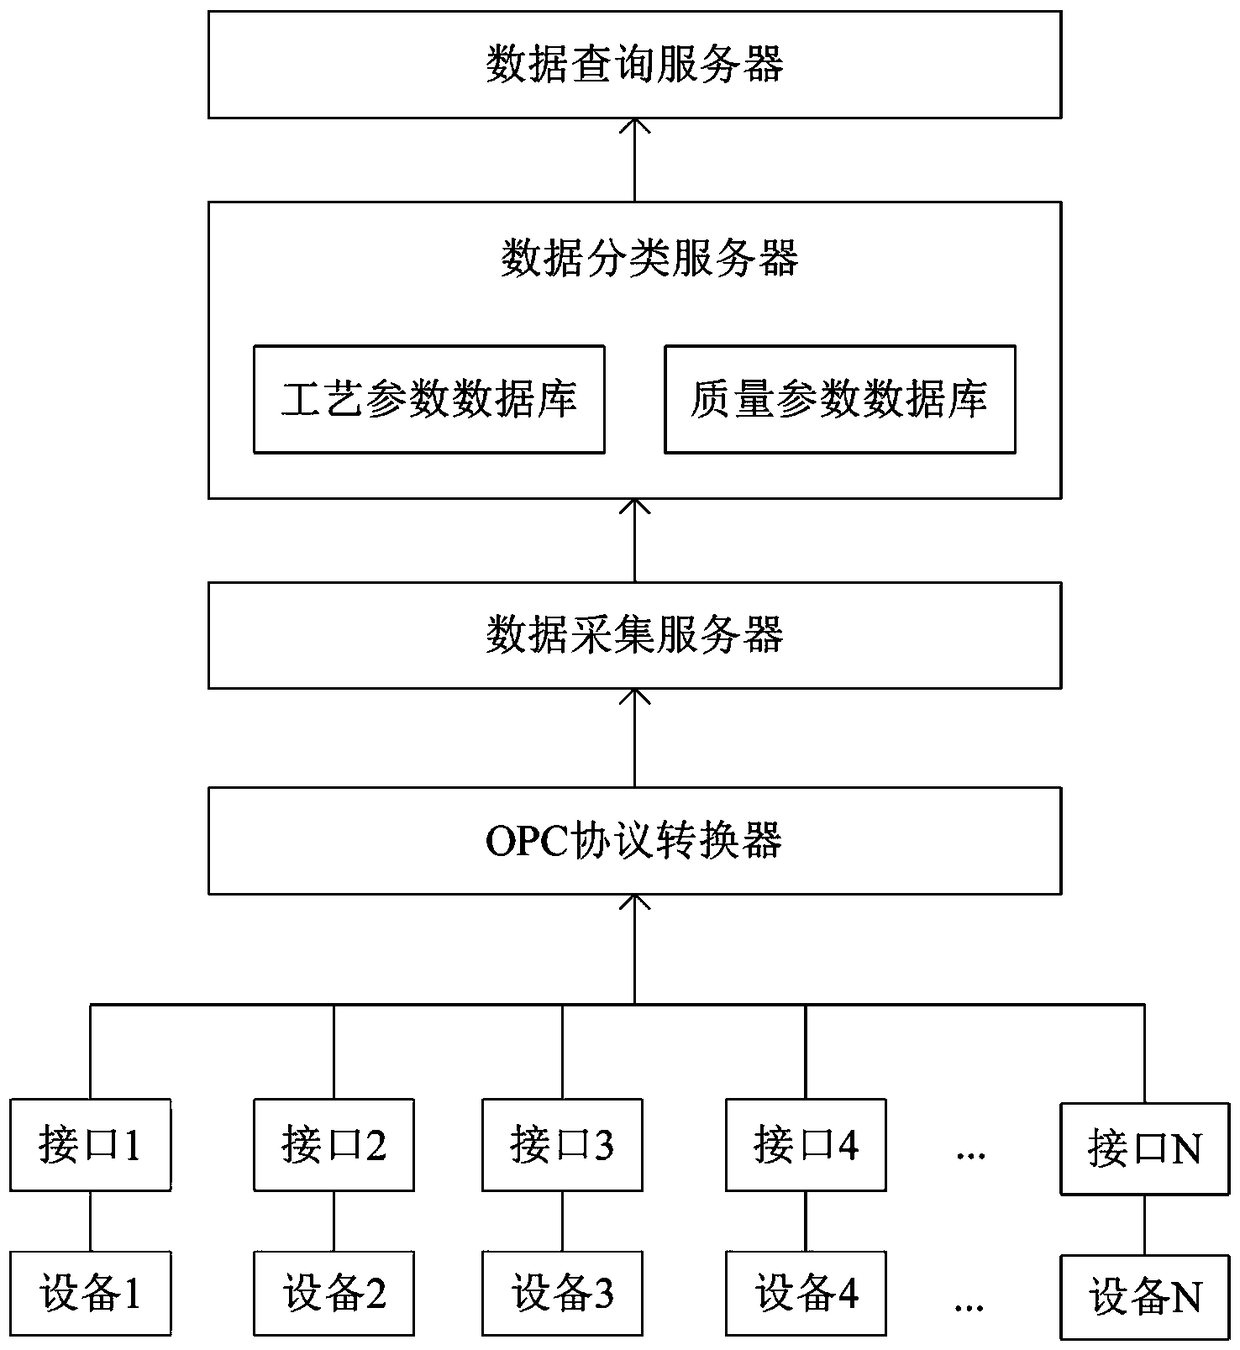 A Chinese medicinal preparation production processing data acquisition system